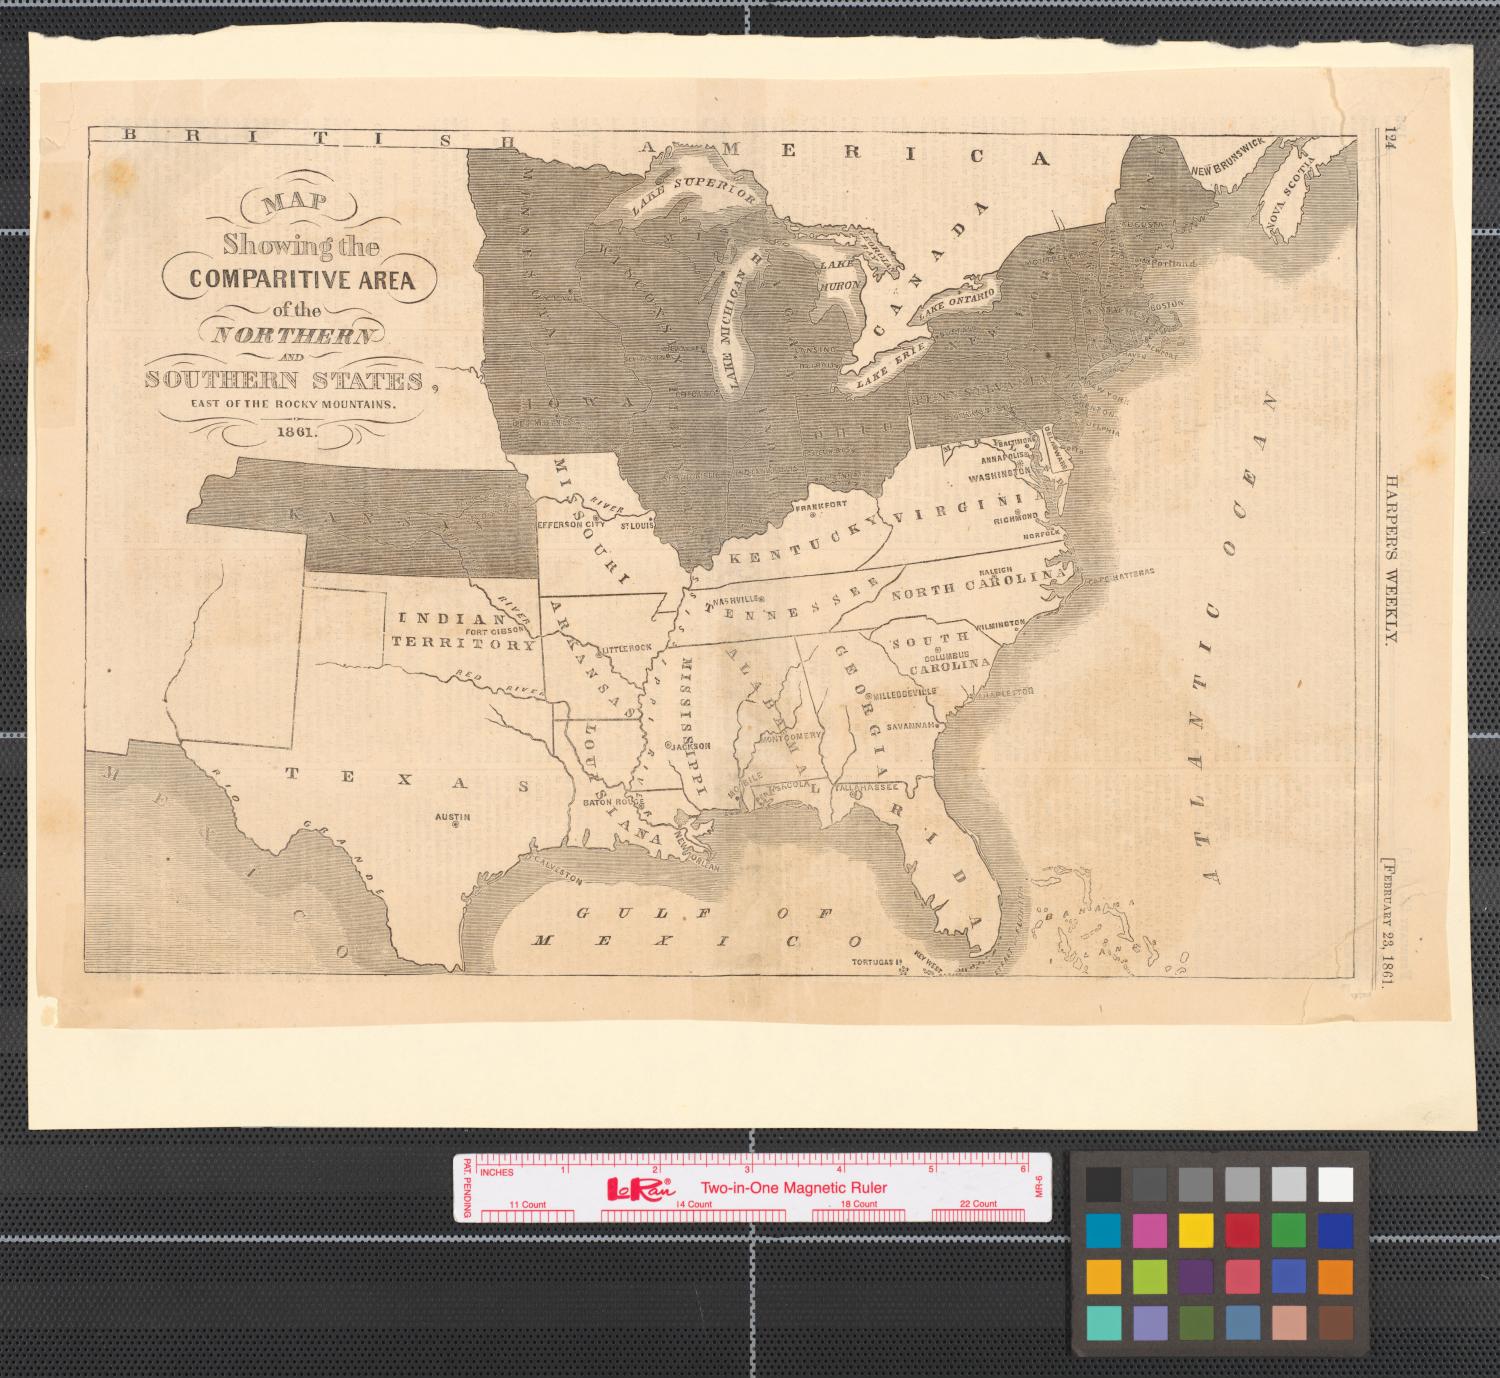 Map showing the comparitive area of the Northern and Southern states east of the Rocky Mountains, 1861.
                                                
                                                    [Sequence #]: 1 of 2
                                                